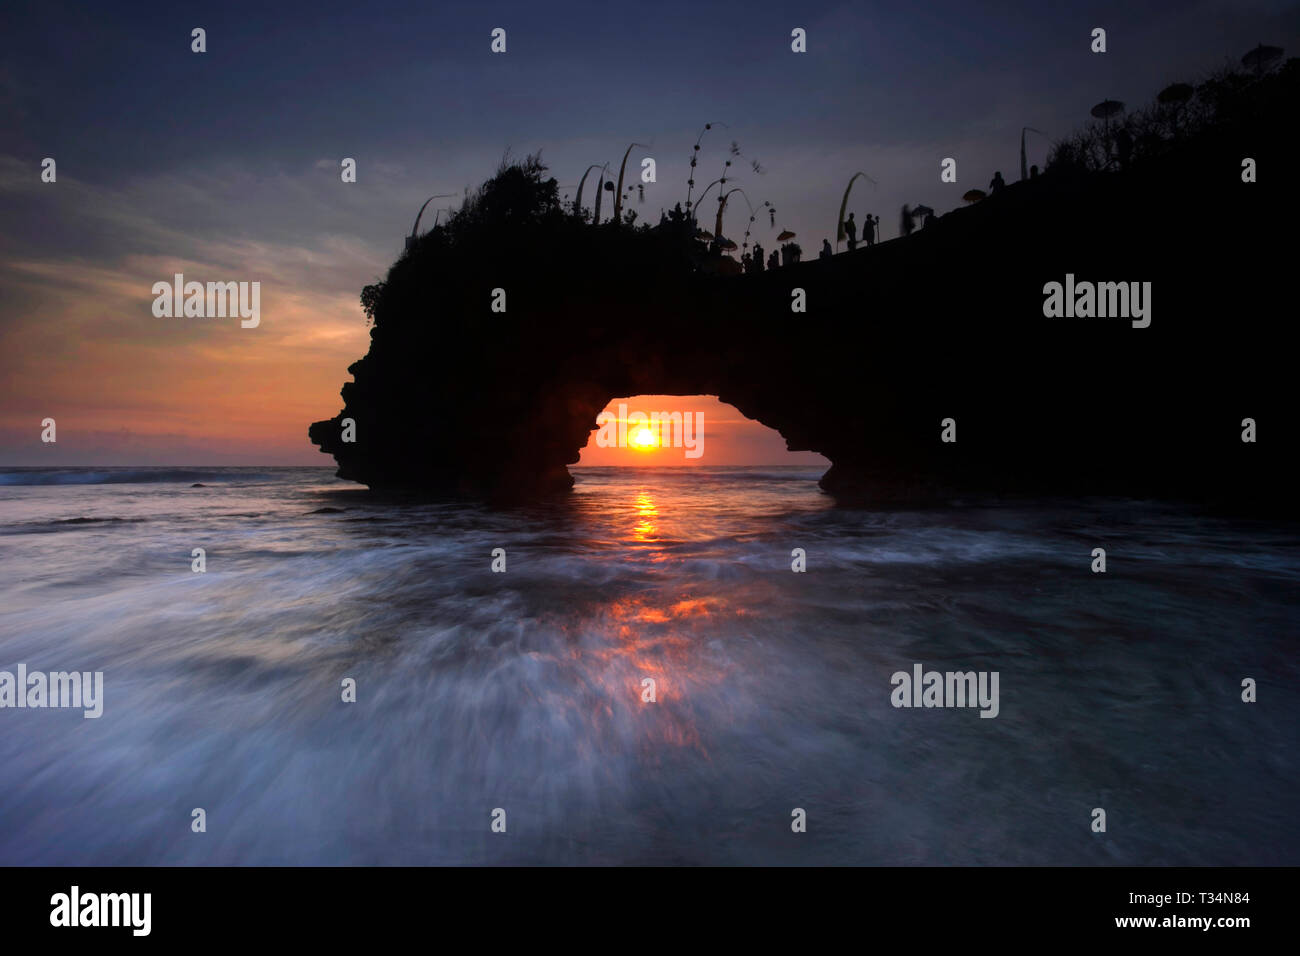 Sunset view through a rocky arch on the beach, Bali, Indonesia Stock Photo